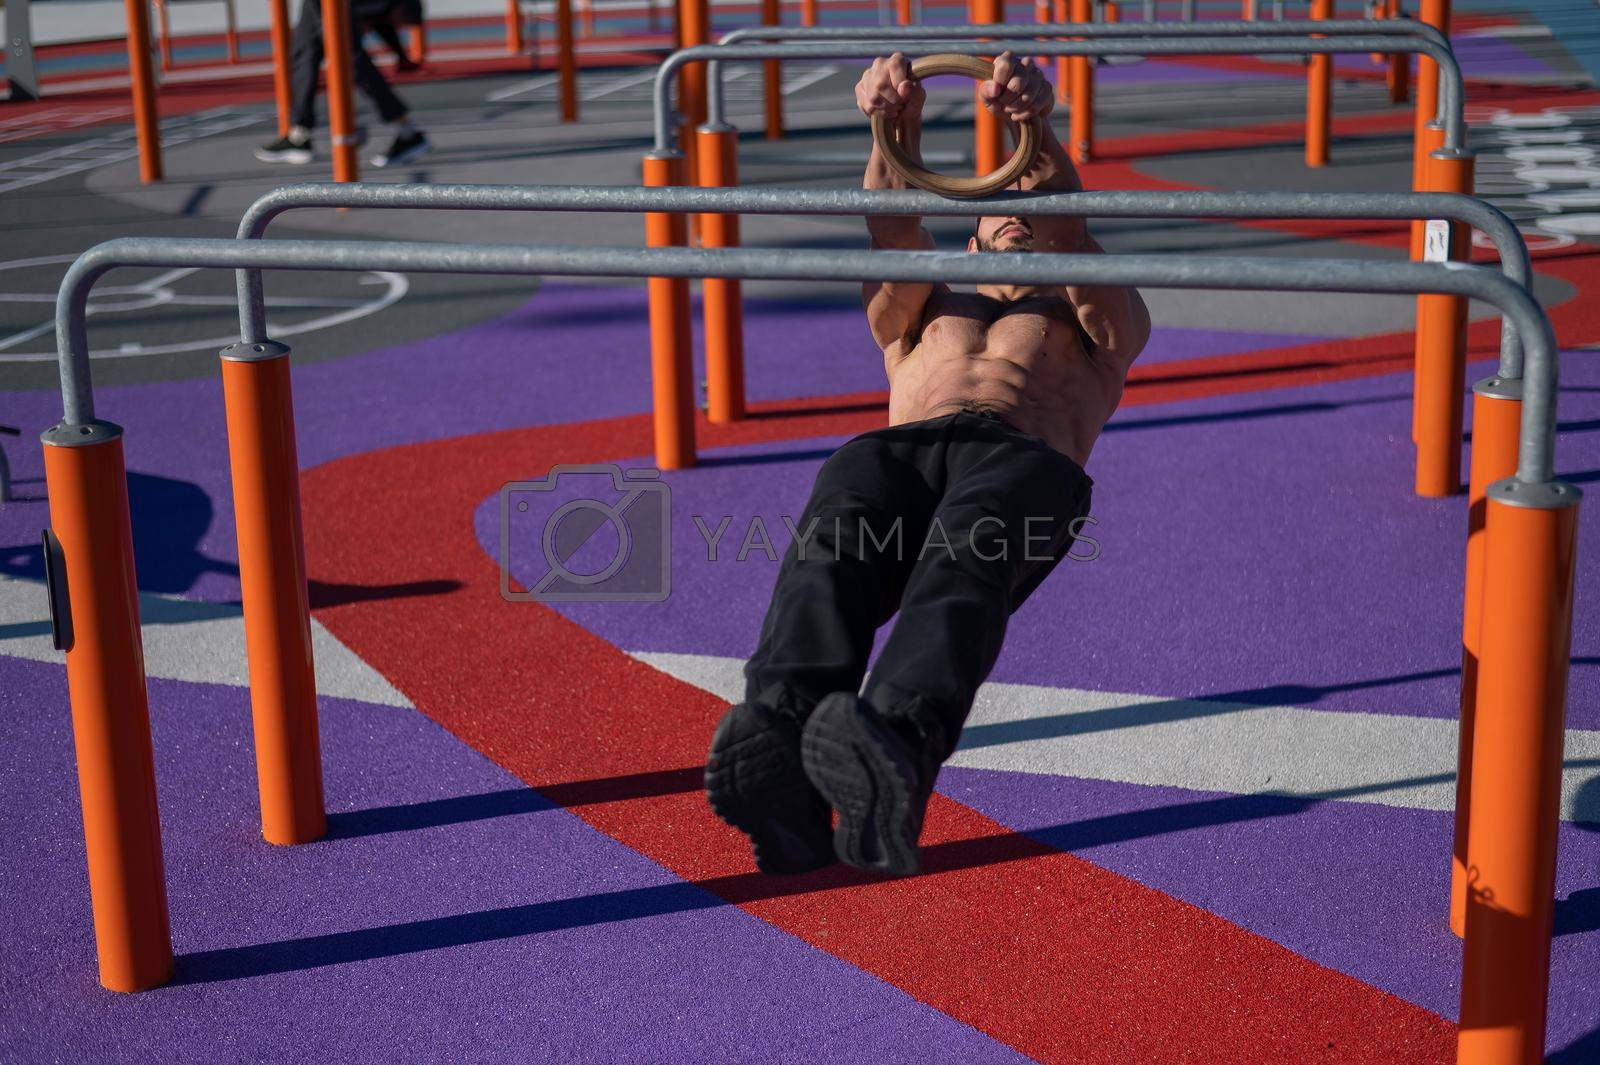 Royalty free image of Shirtless man doing horizontal balance on parallel bars at sports ground. by mrwed54